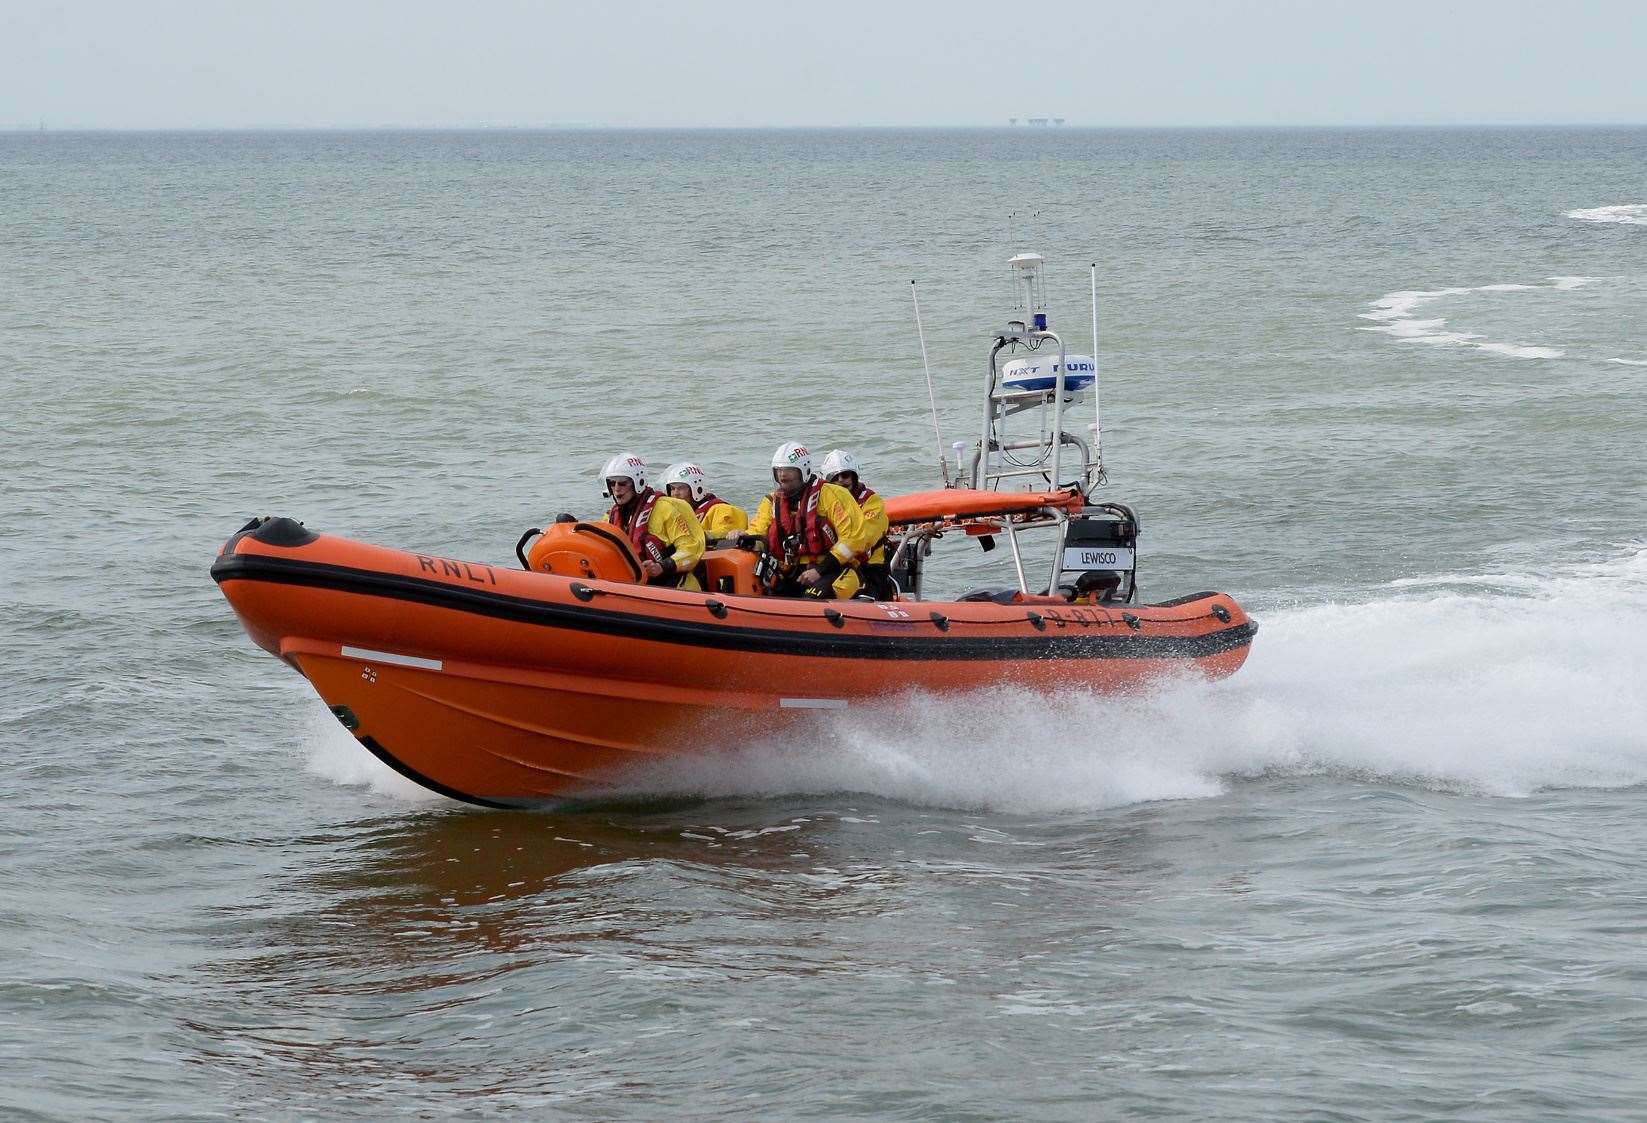 Whitstable Lifeboat. RNLI Whitstable stock image. (13490714)